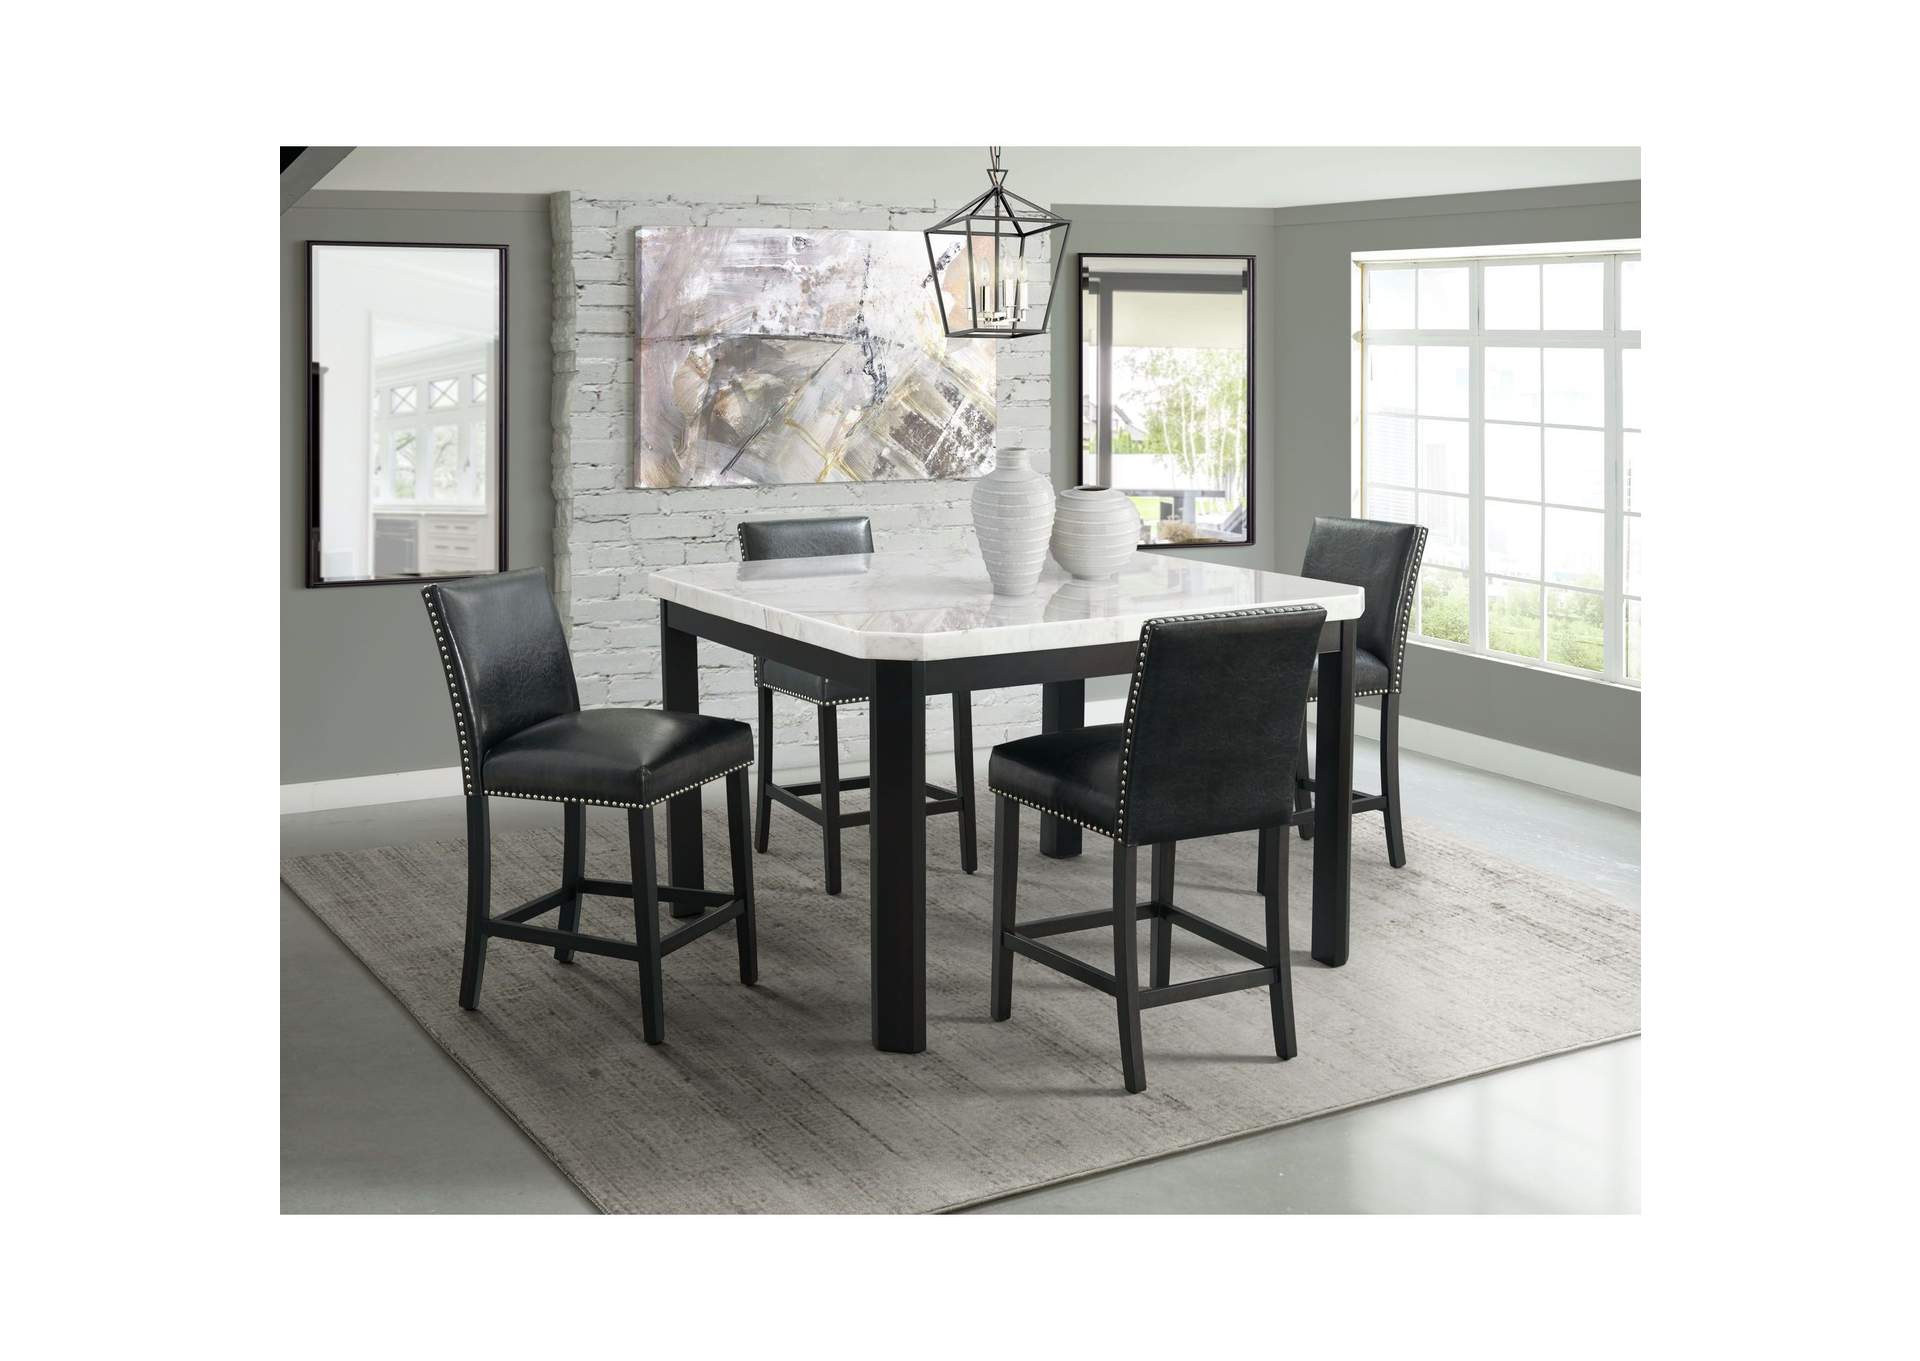 Francesca White Counter Height Dining Table,Elements